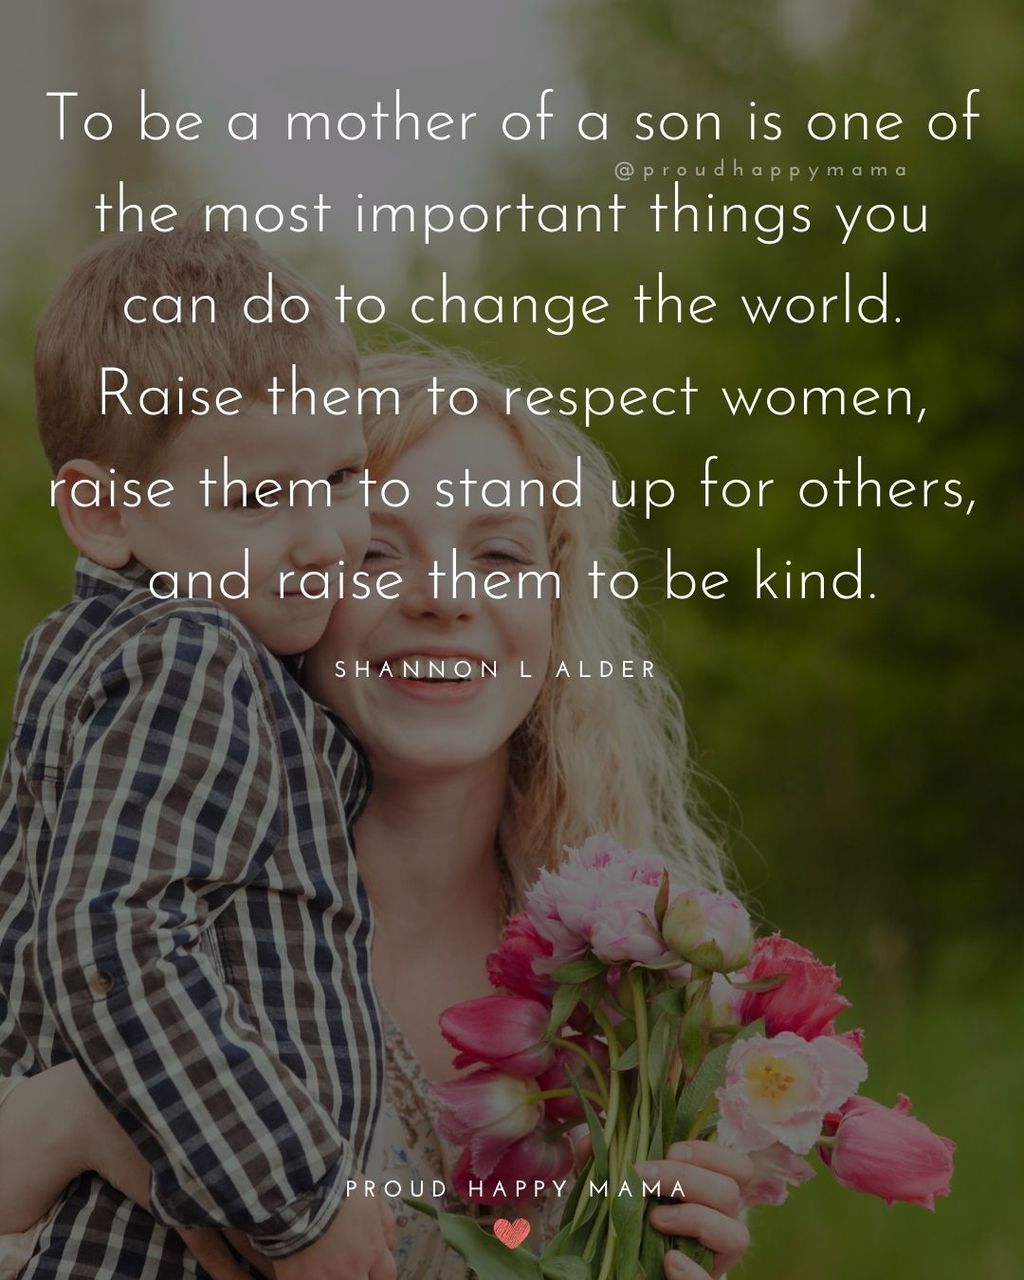 Boy Mom Quotes - To be a mother of a son is one of the most important things you can do to change the world. Raise them to respect women, raise them to stand up for others, and raise them to be kind. – Shannon L Alder